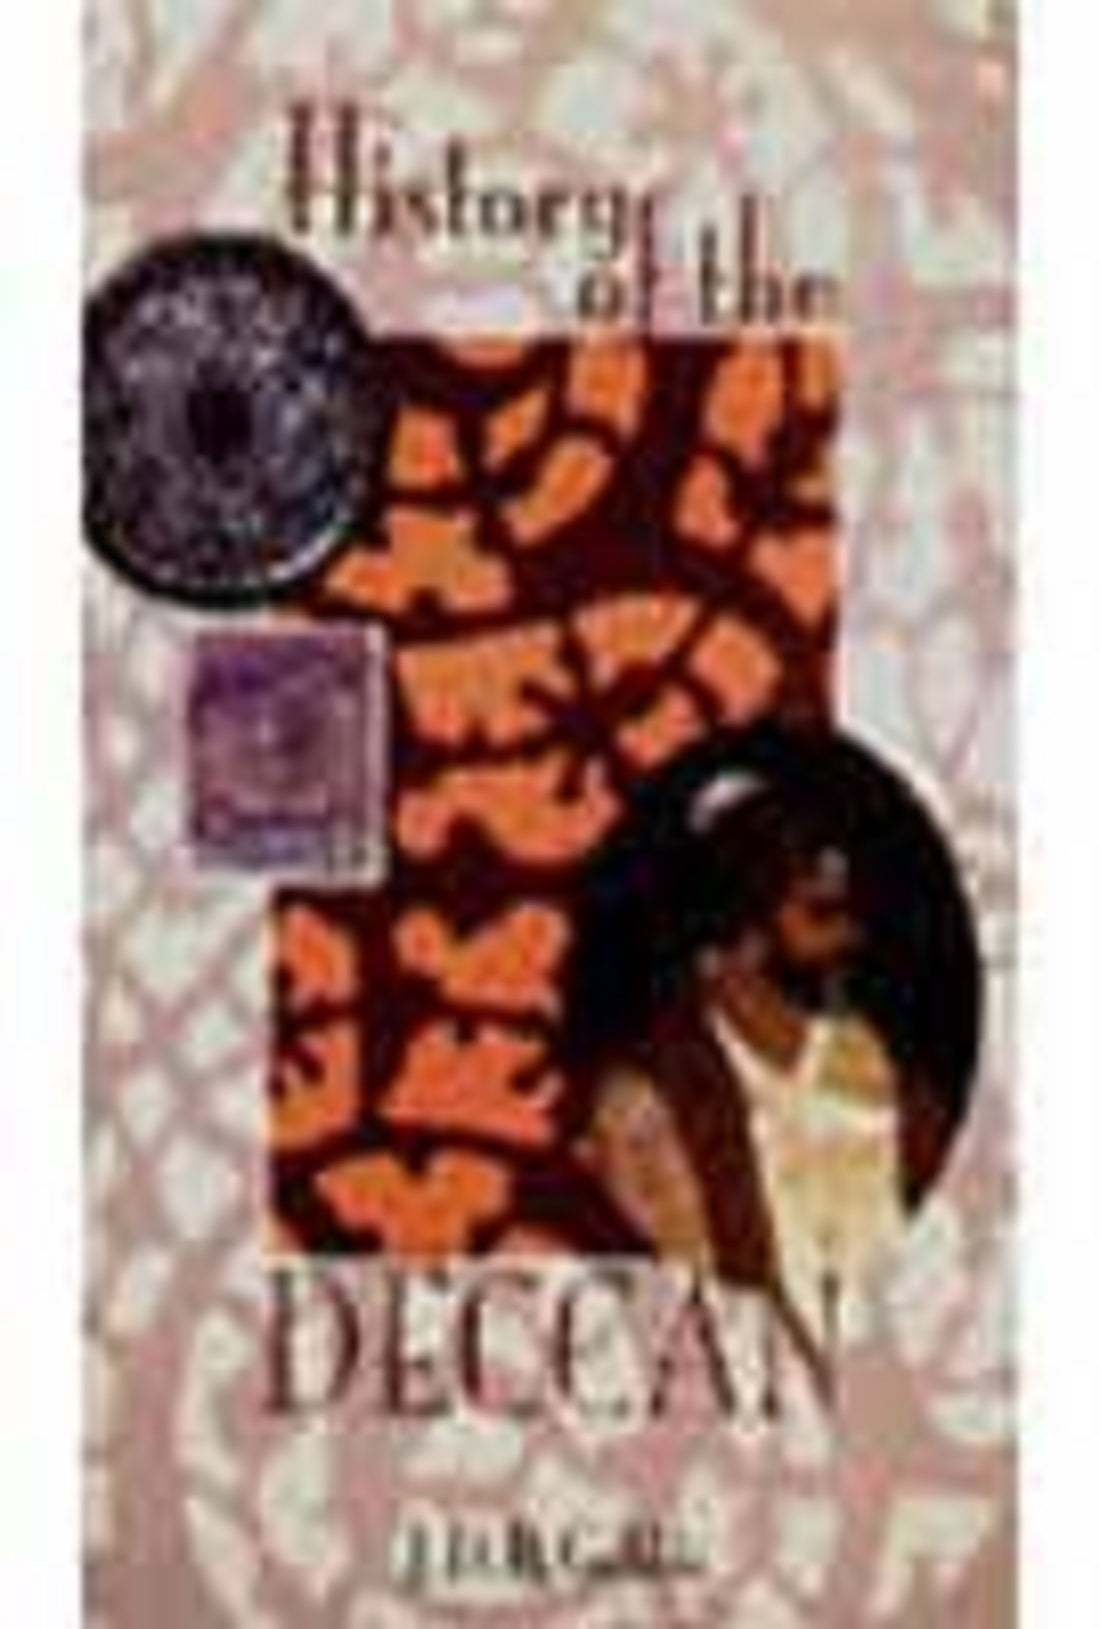 HISTORY OF THE DECCAN